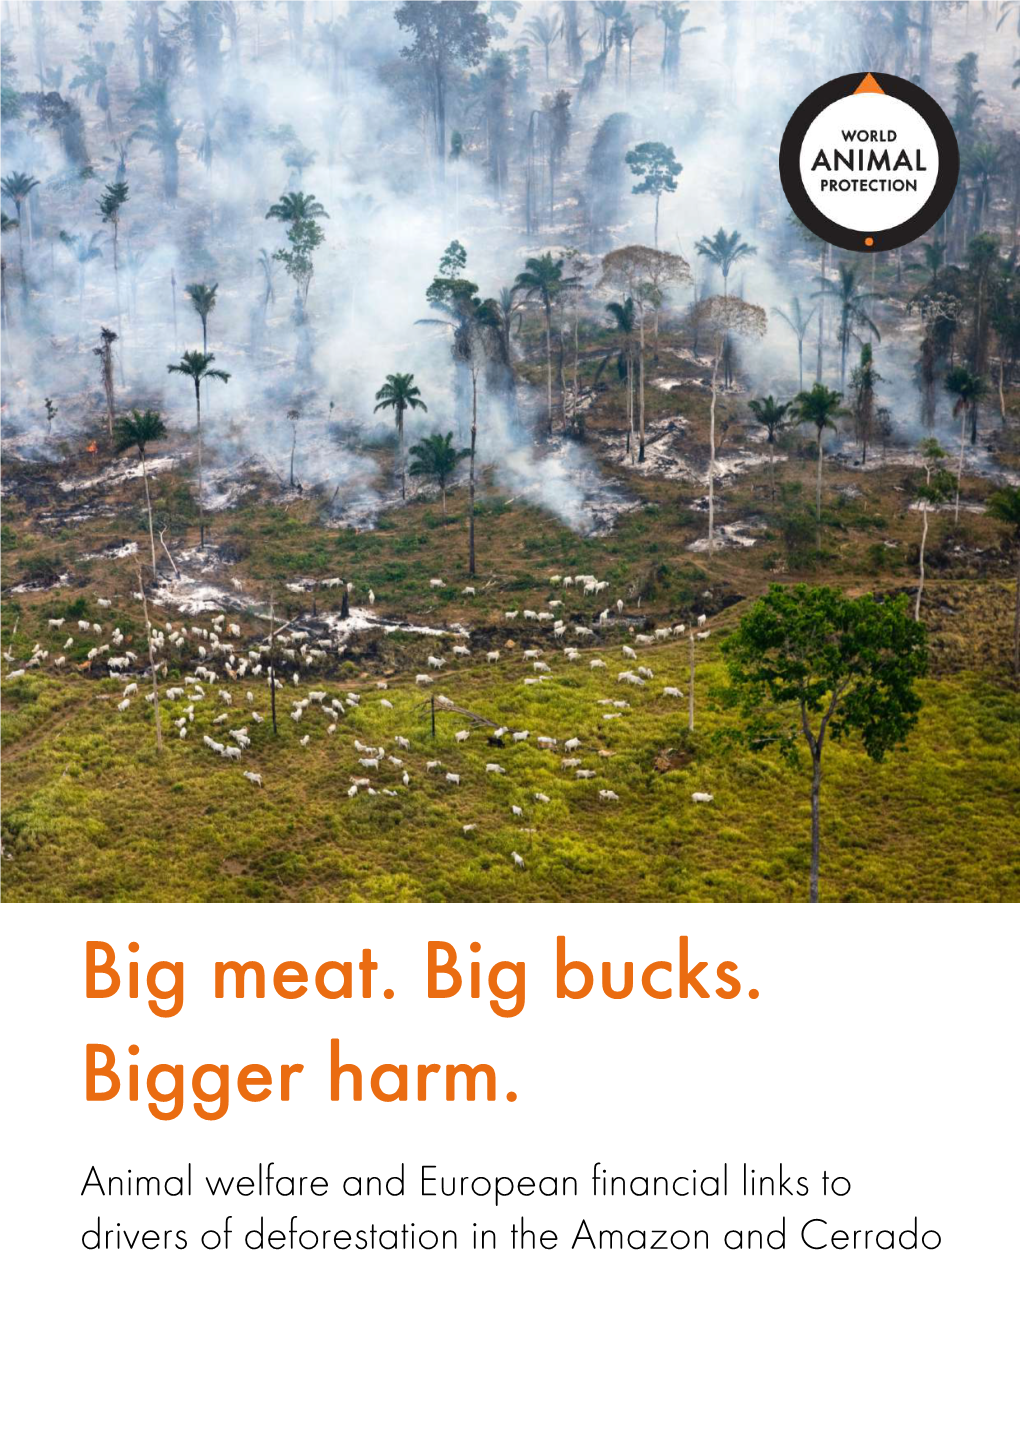 Big Meat. Big Bucks. Bigger Harm. Animal Welfare and European Financial Links to Drivers of Deforestation in the Amazon and Cerrado